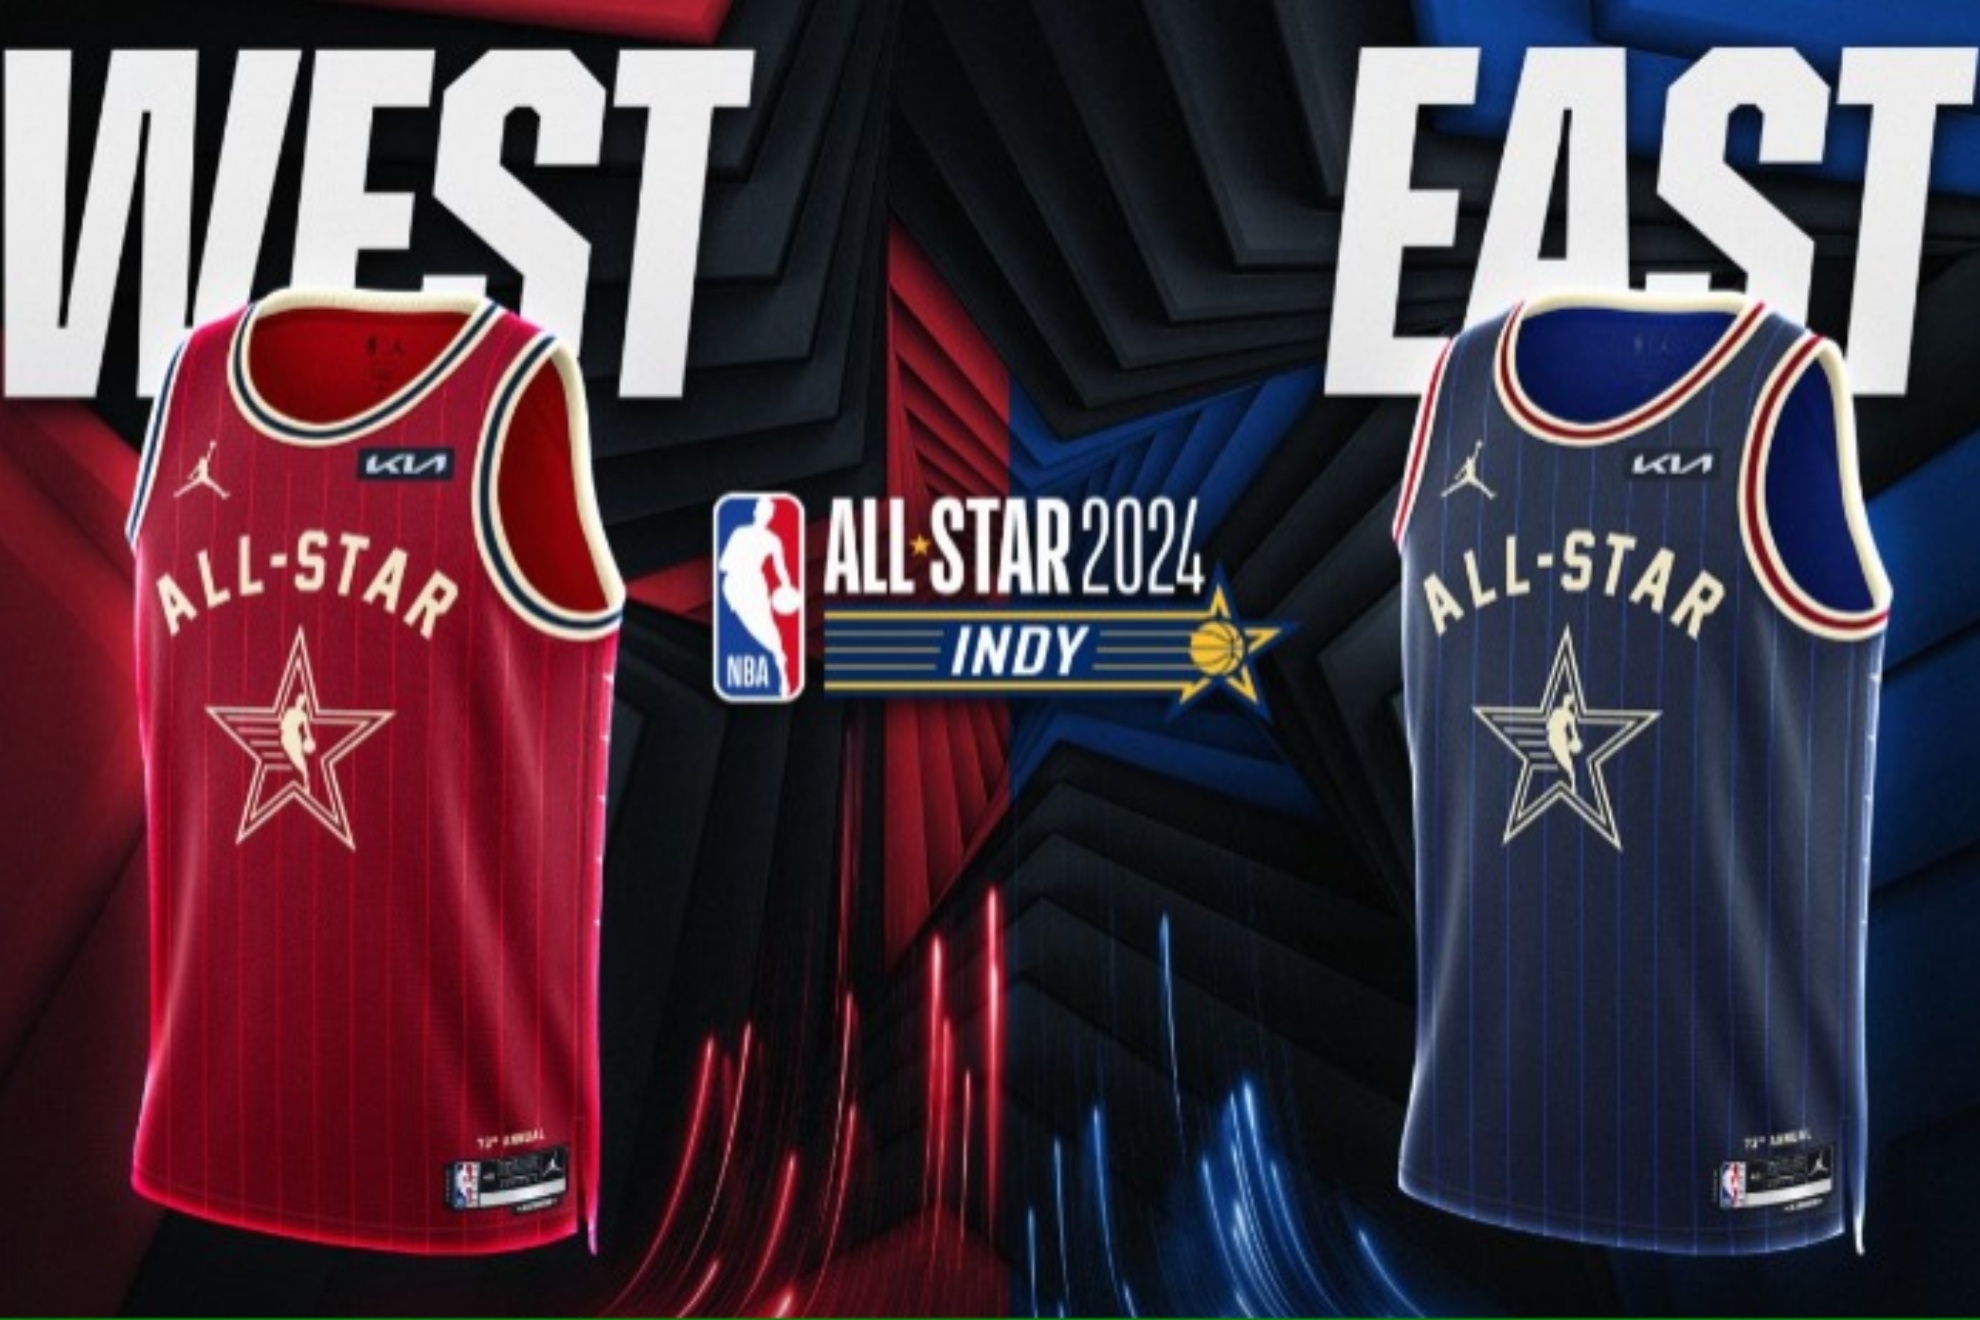 The NBA All-Star Weekend will take place in Indianapolis from Friday, February 16-18